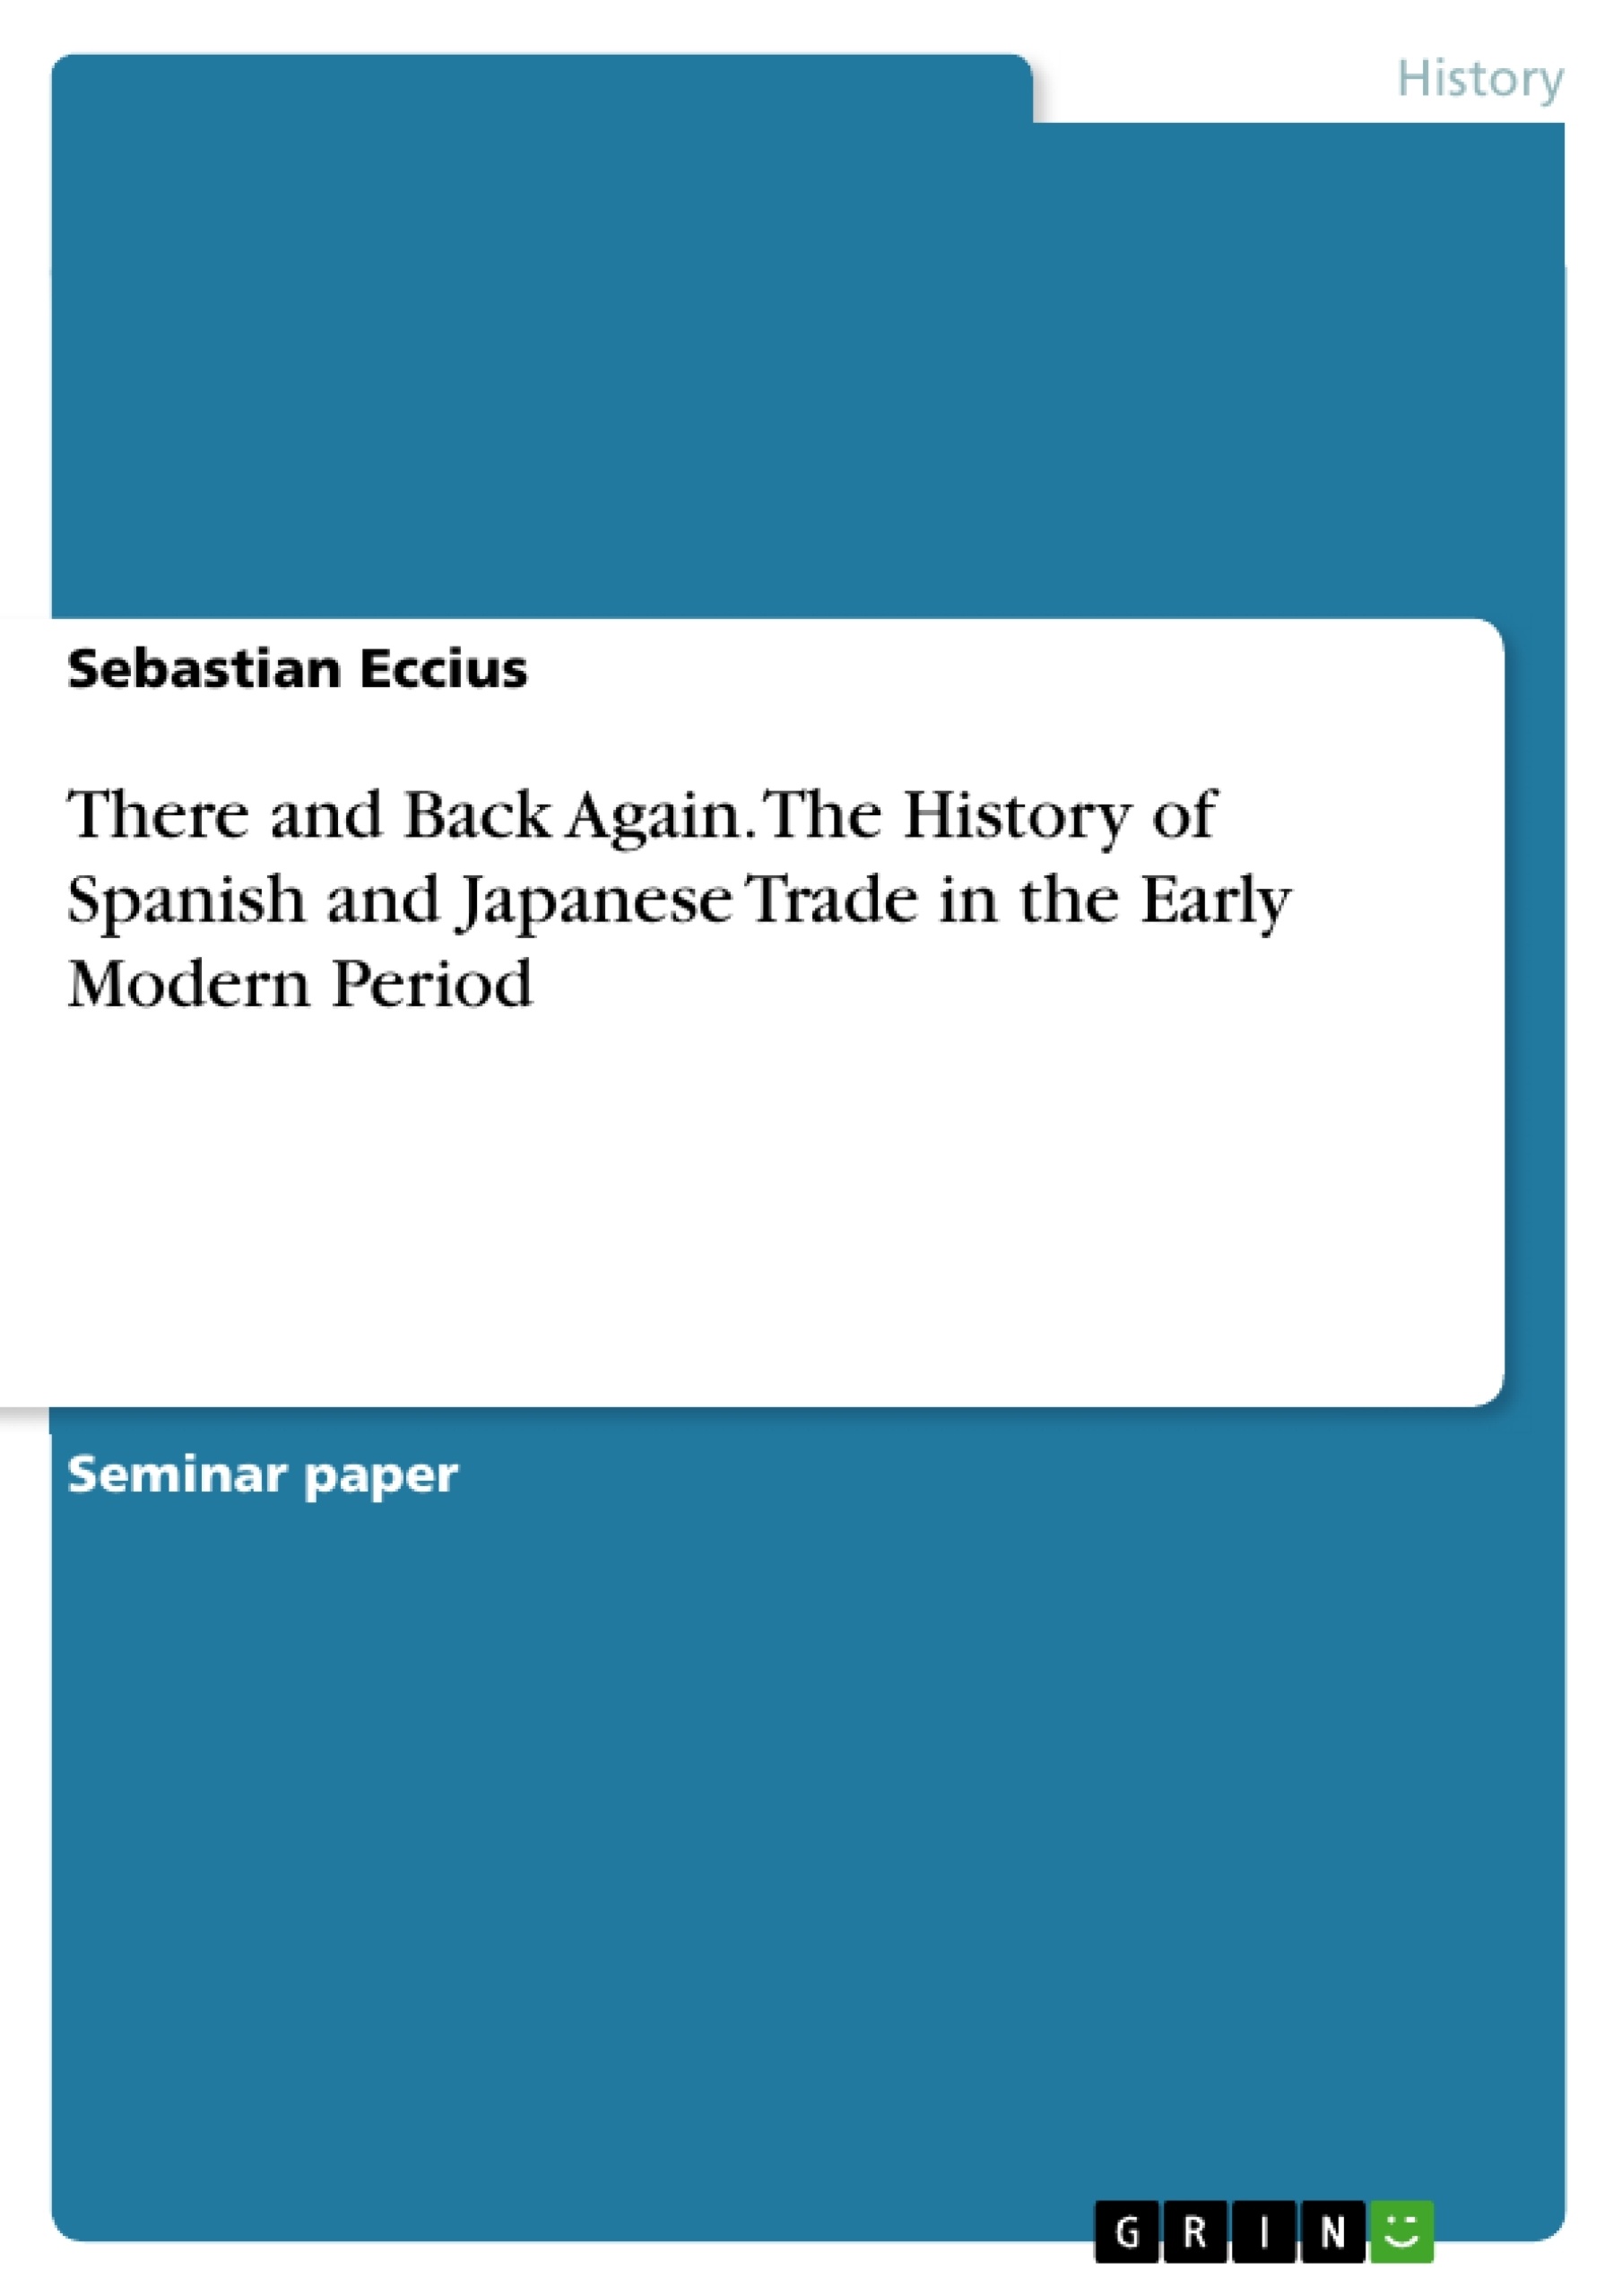 Title: There and Back Again. The History of Spanish and Japanese Trade in the Early Modern Period